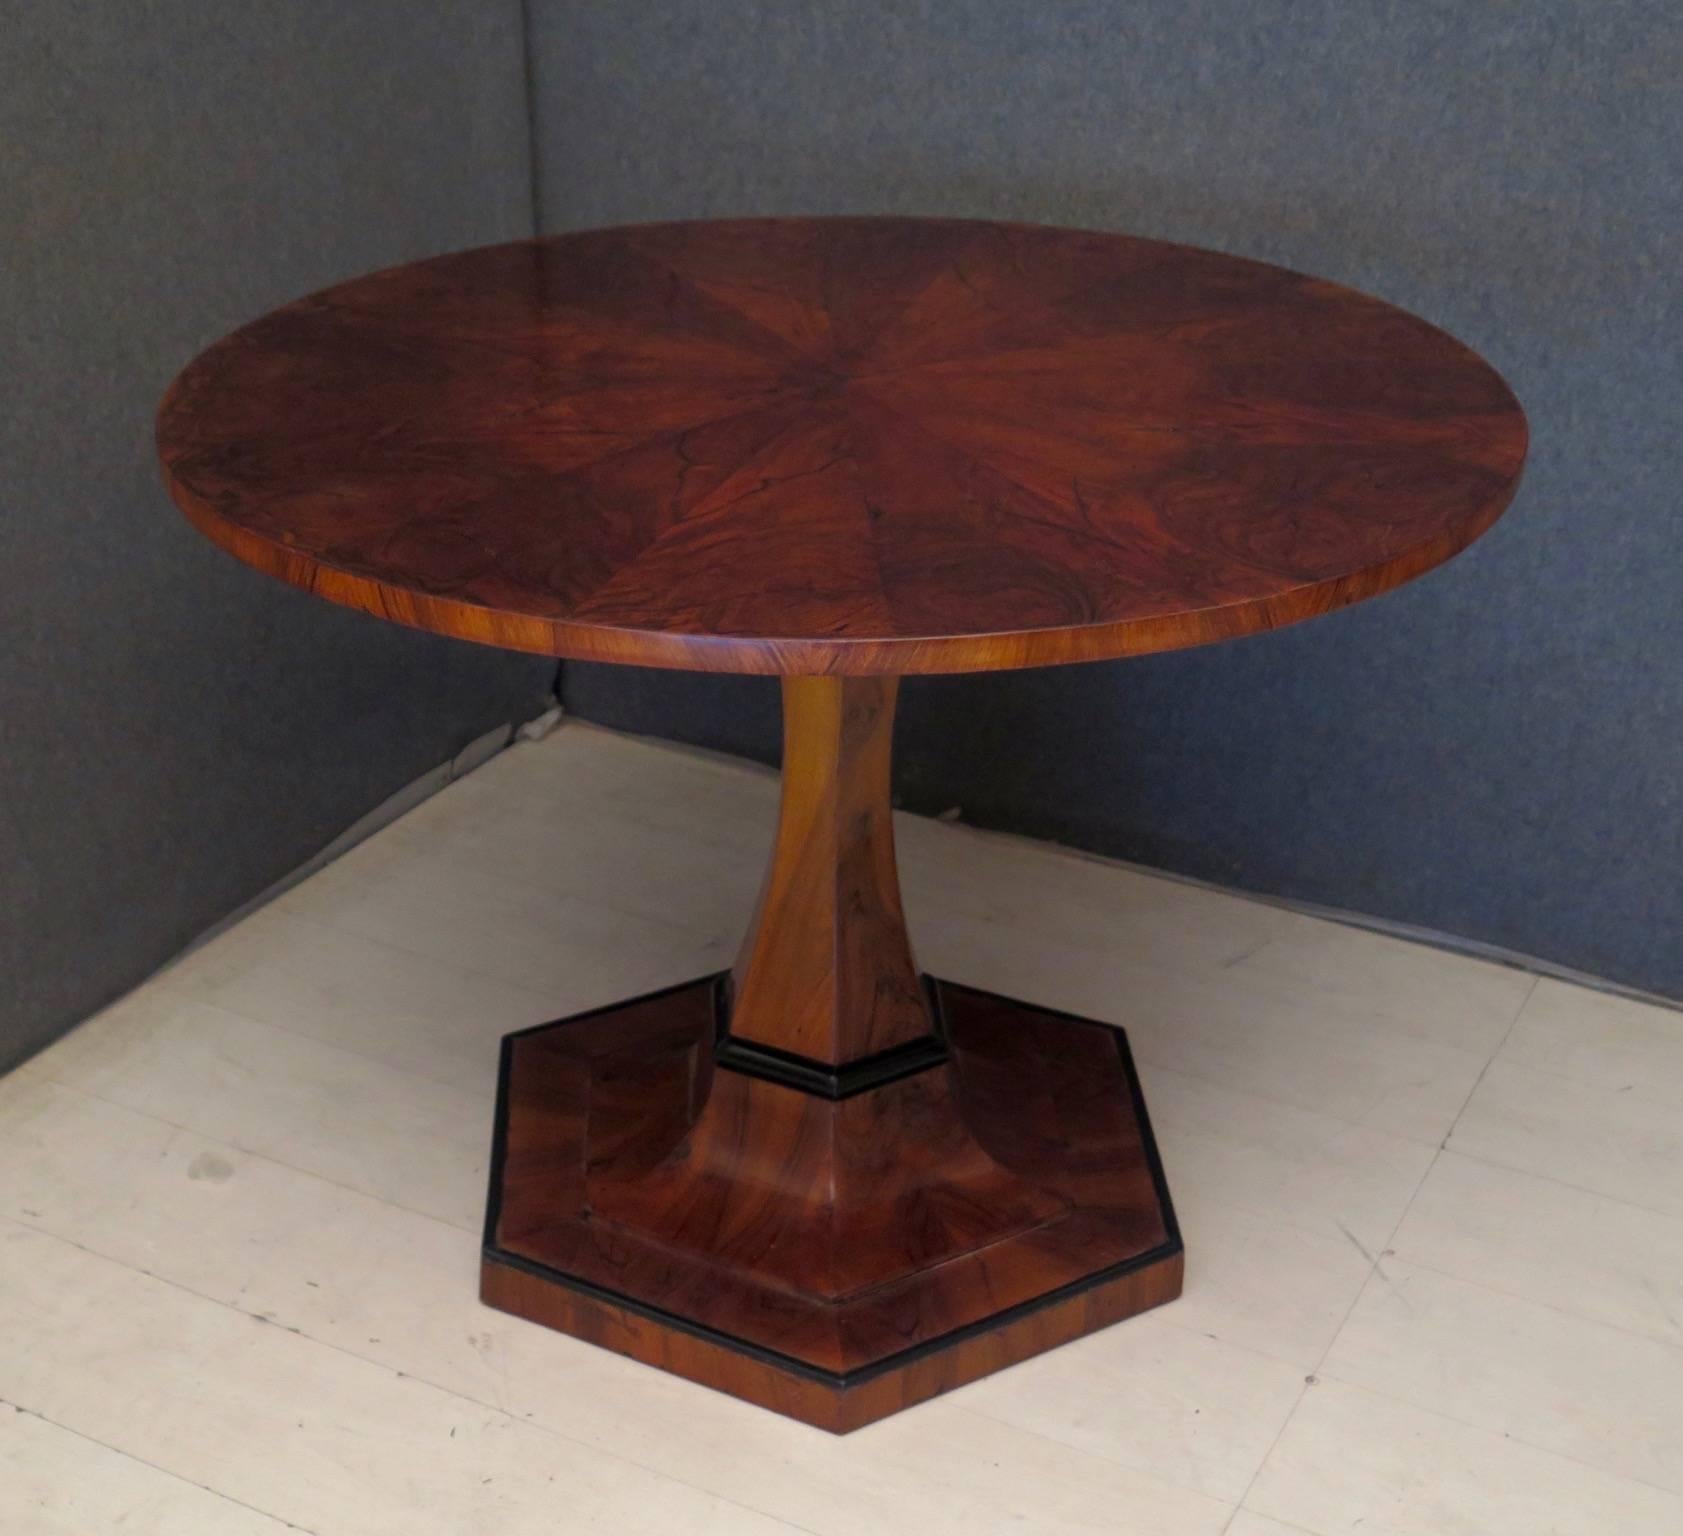 Beautiful veneer of this folding / center table, of the early Austrian Biedermeier period.

All veneered in walnut wood. You can see the beautiful design of the wood veneer on the table top, put into wedges of cake. Its central leg is very narrow